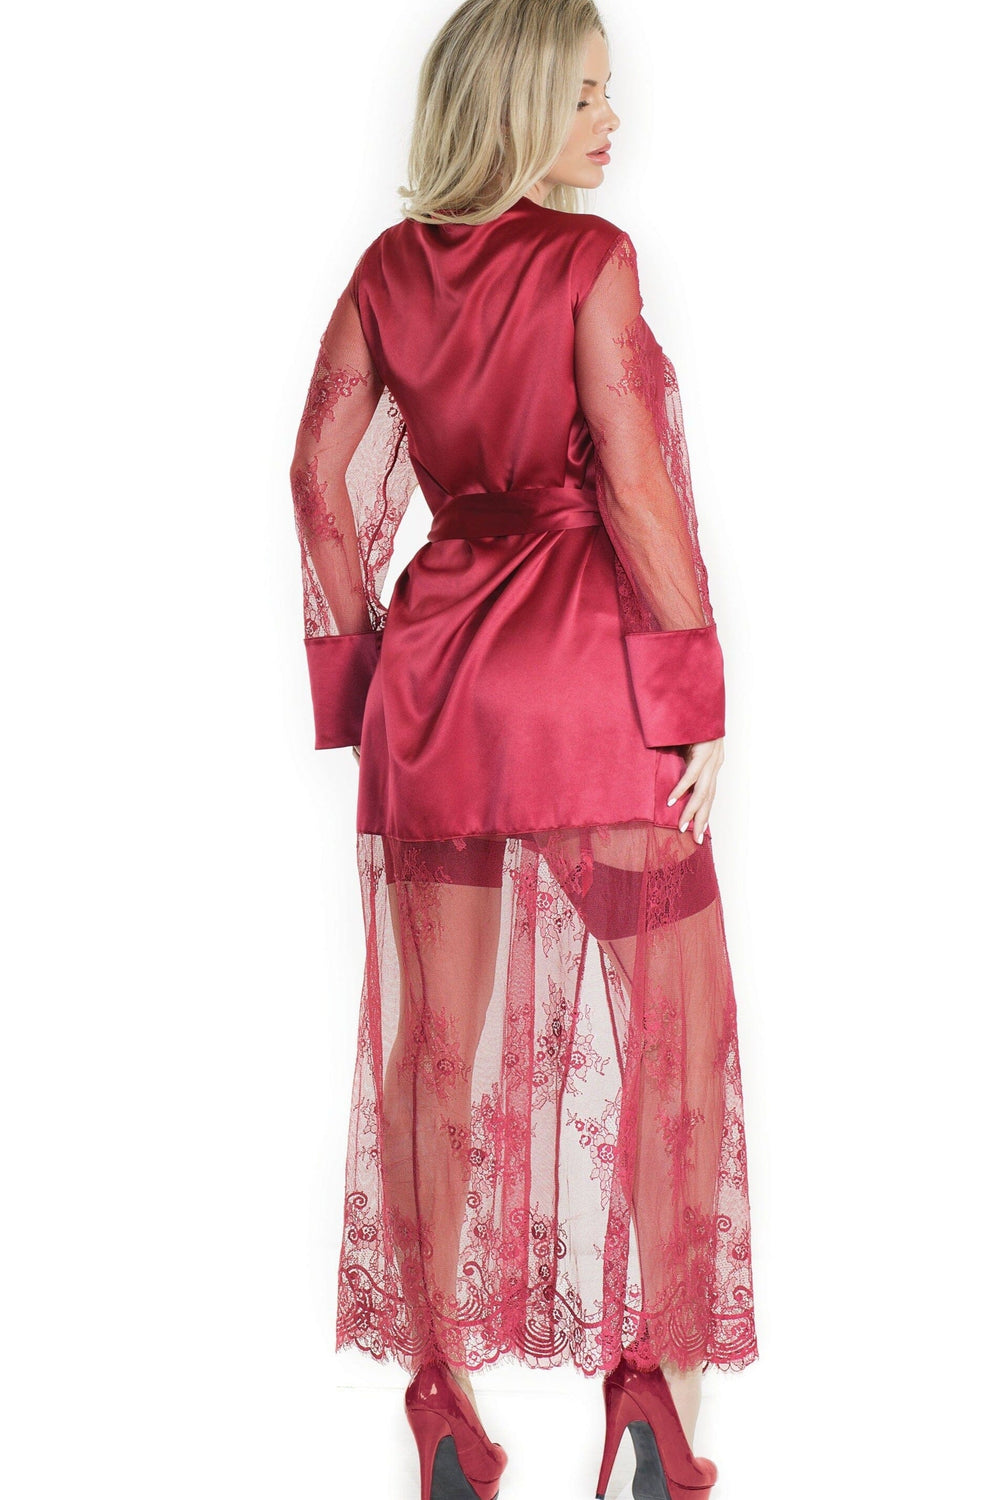 Full Length Satin And Eyelash Rigid Lace Robe With Sash-Gowns + Robes-Coquette-Red-O/S-SEXYSHOES.COM